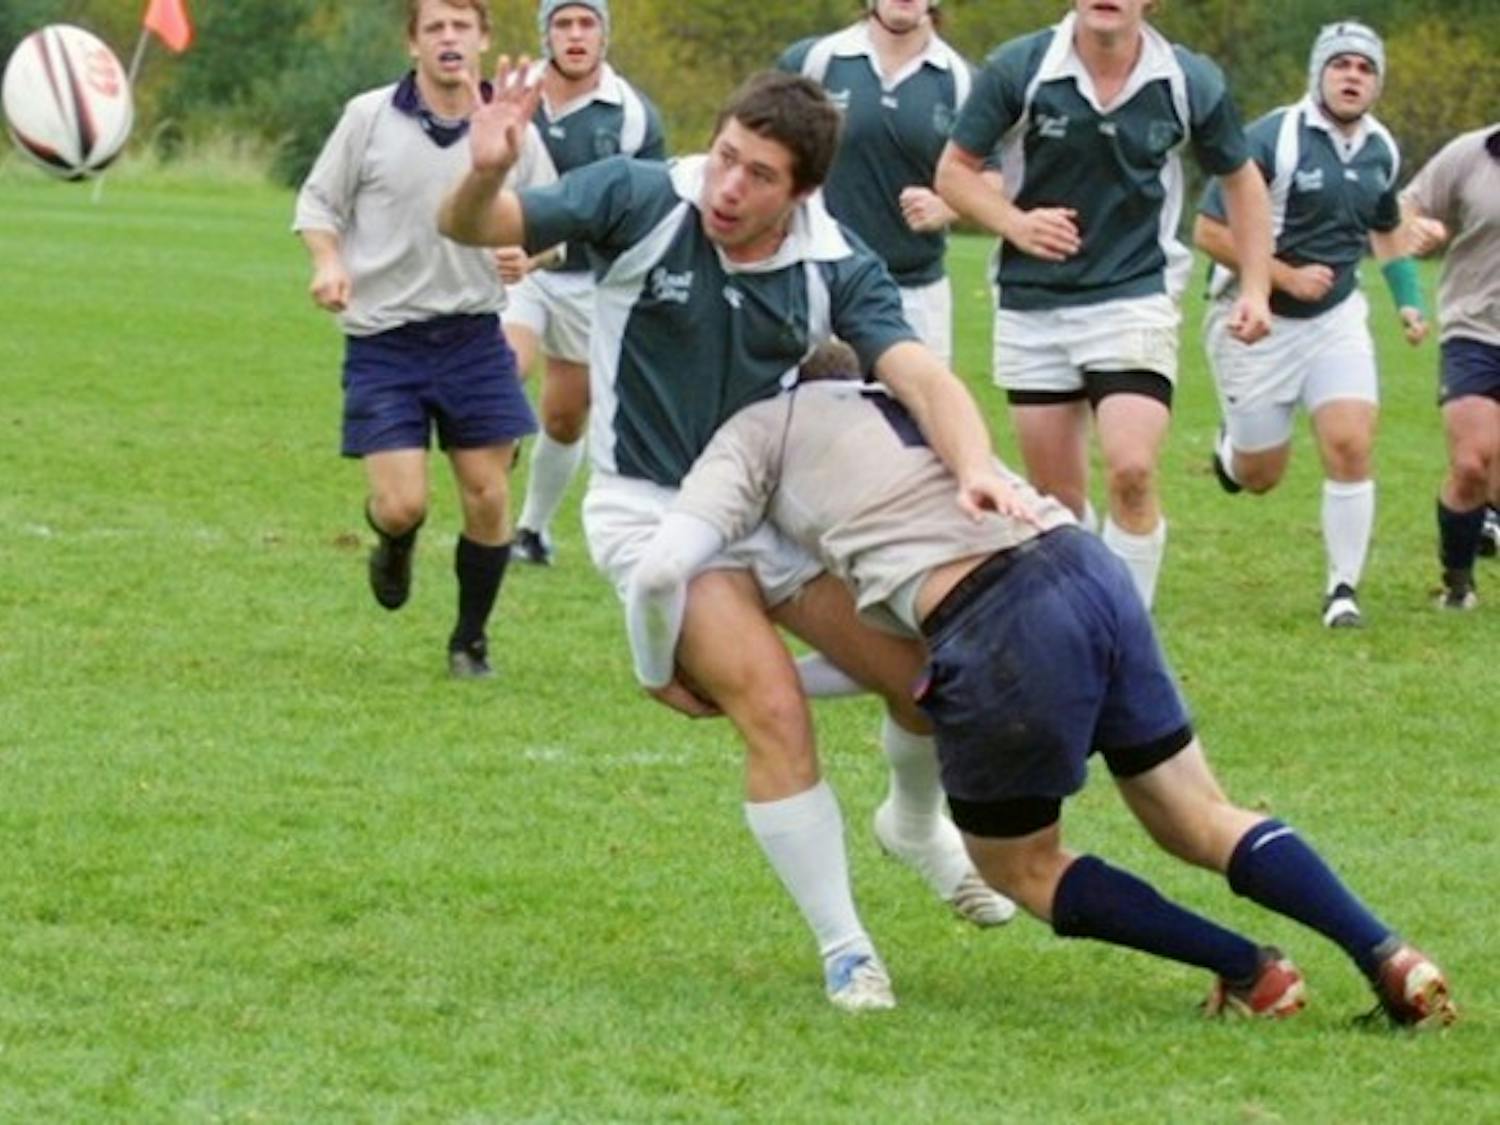 Tom Manzo '07 and the Big Green ruggers put up a Wilt Chamberlain-like performance against UMass on Saturday.